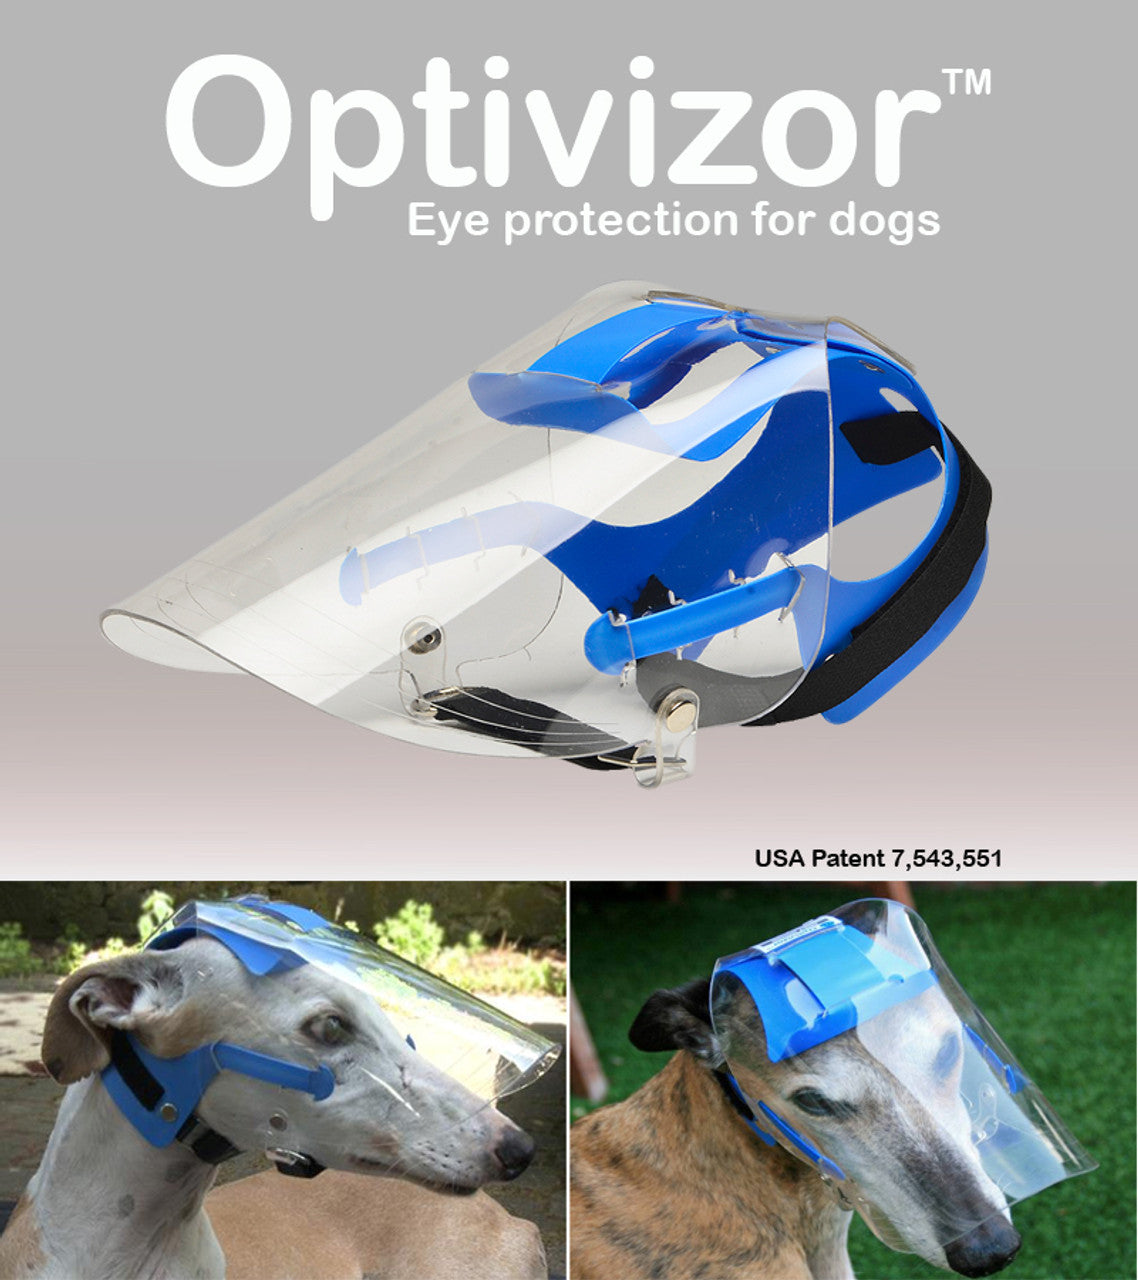 Long Snout Optivizor for Whippets/Greyhounds